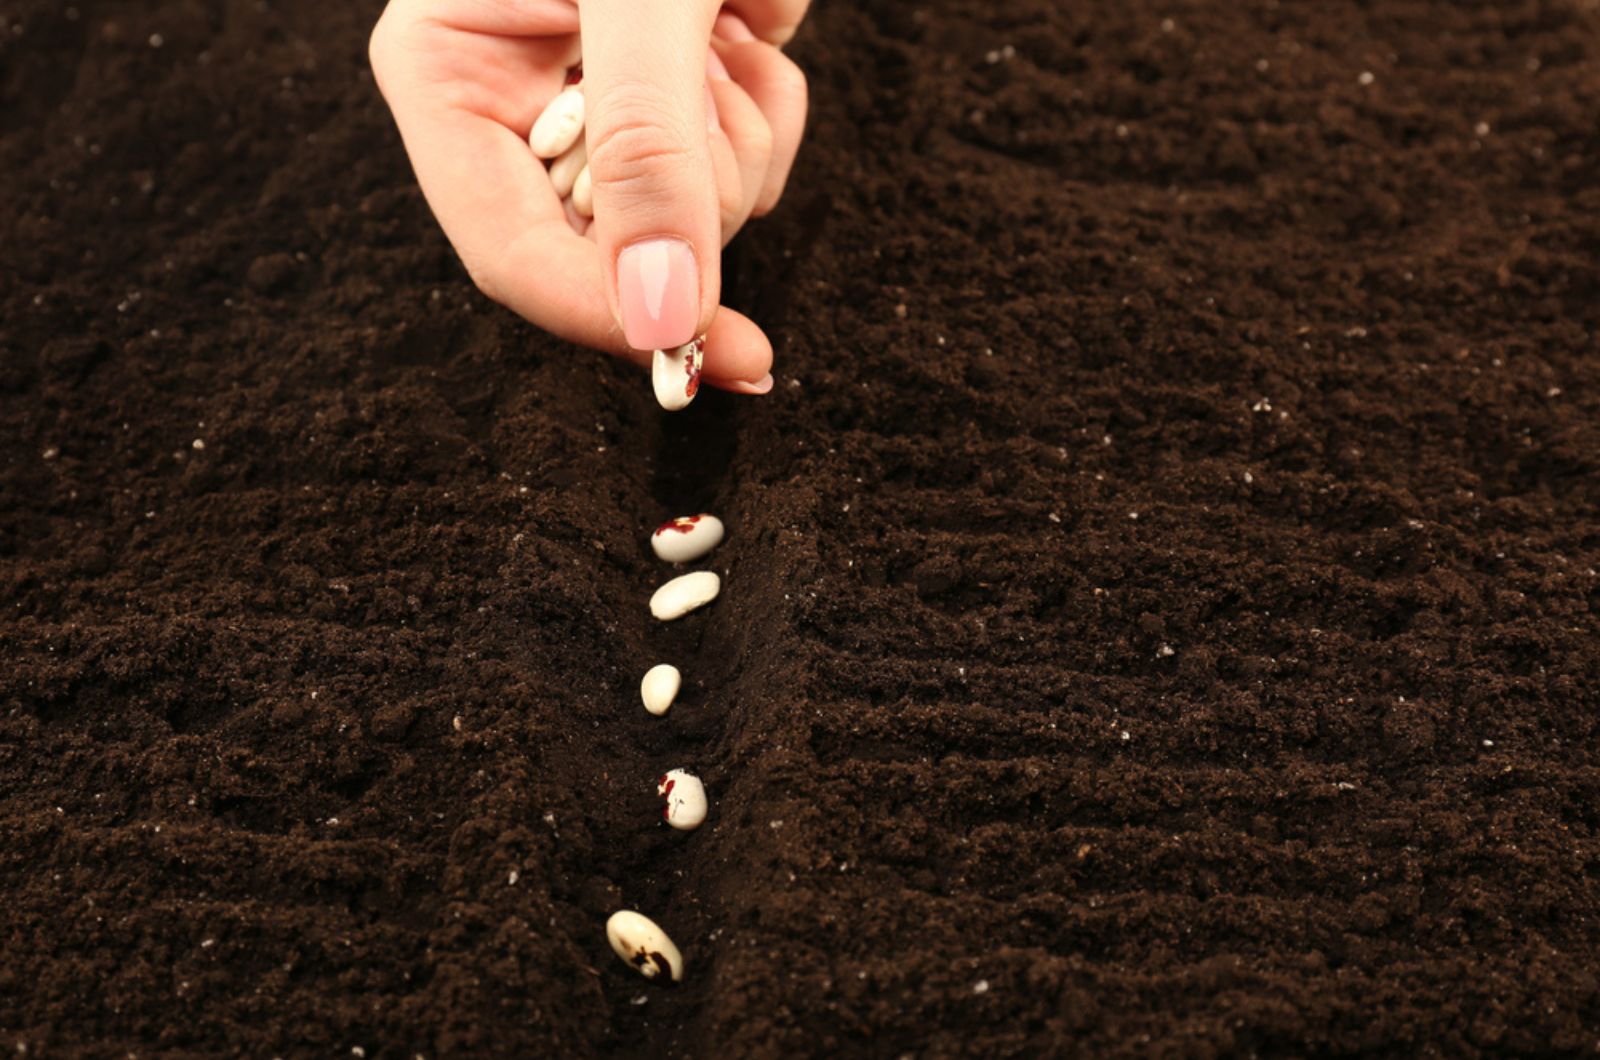 planting bean seeds in the soil